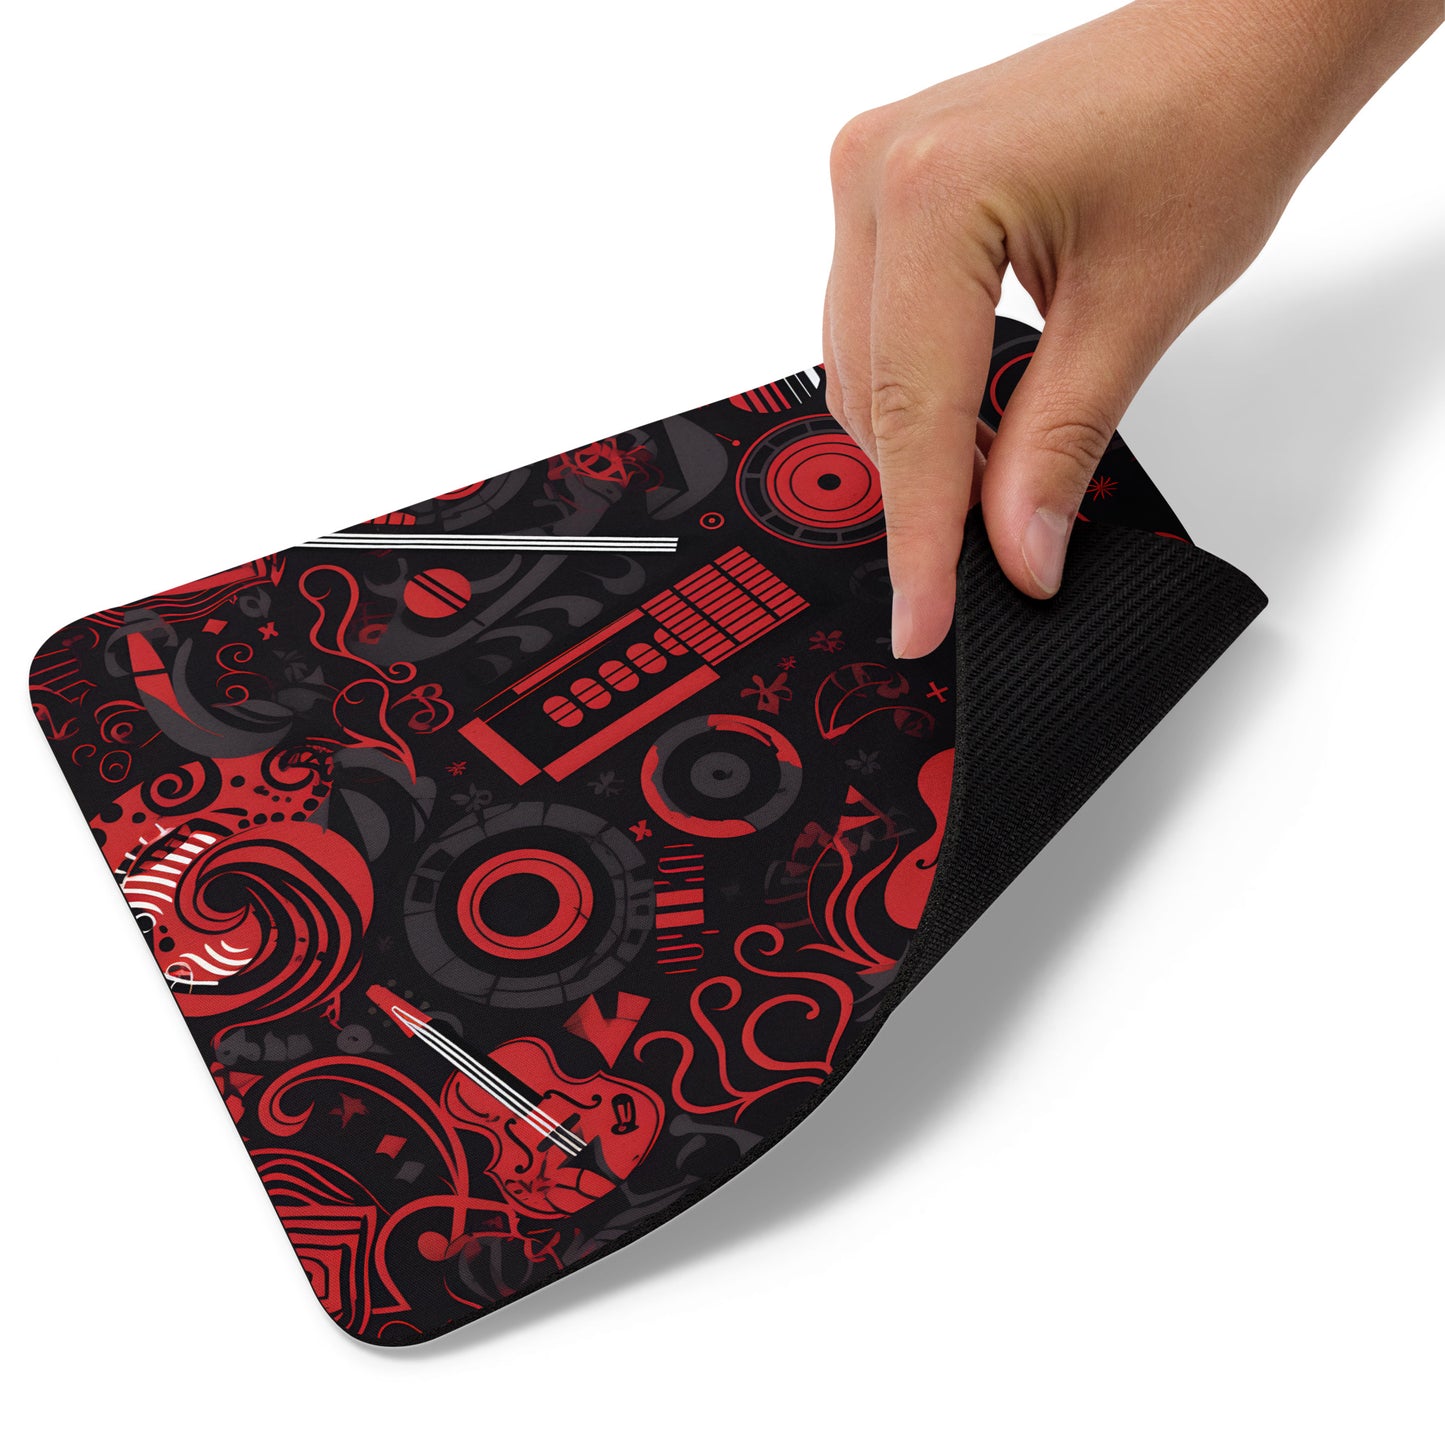 Mouse Pad Red